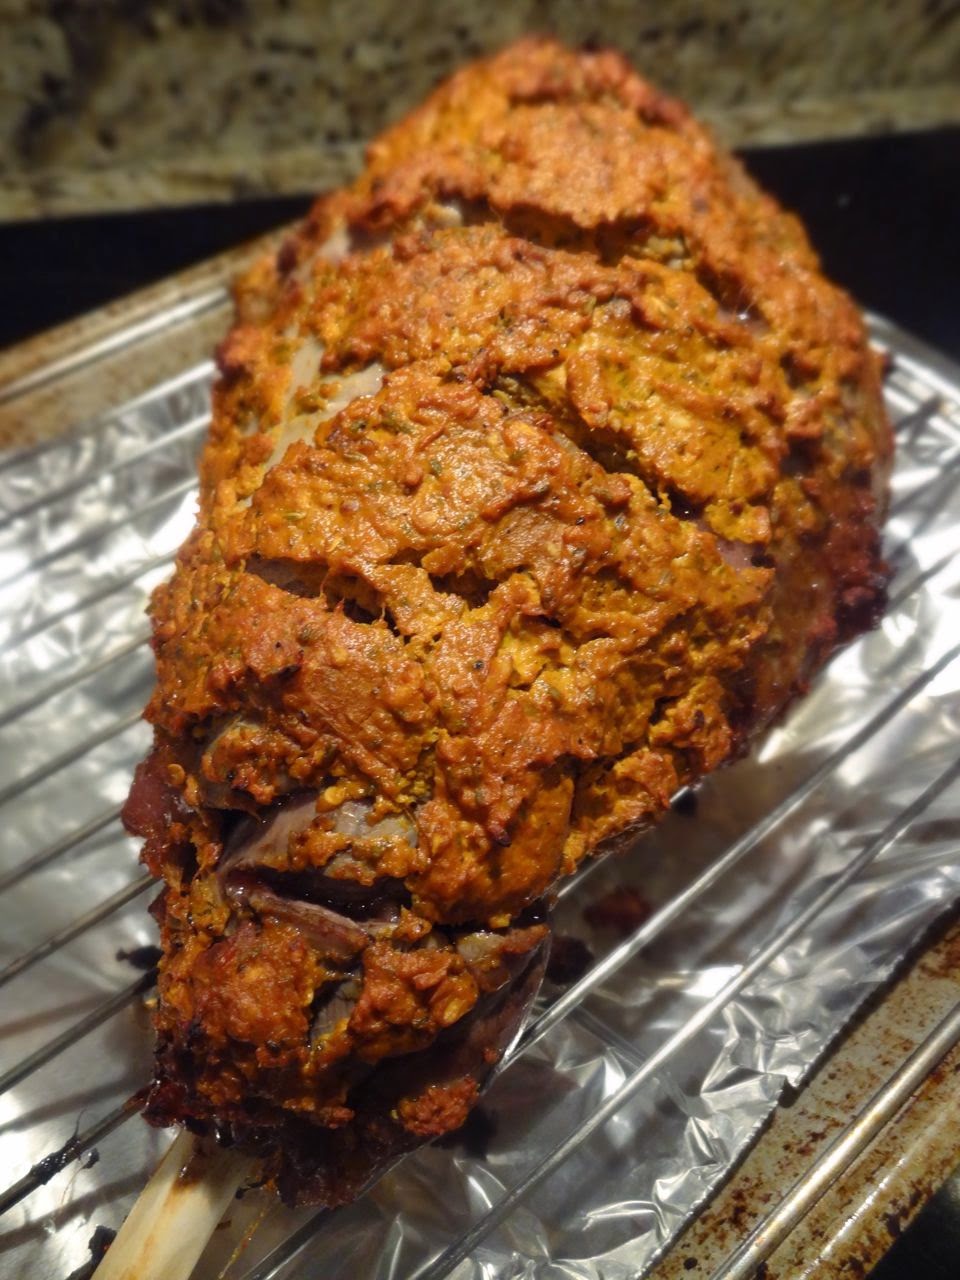 Scrumpdillyicious: Oven Roasted Indian-Spiced Leg of Lamb